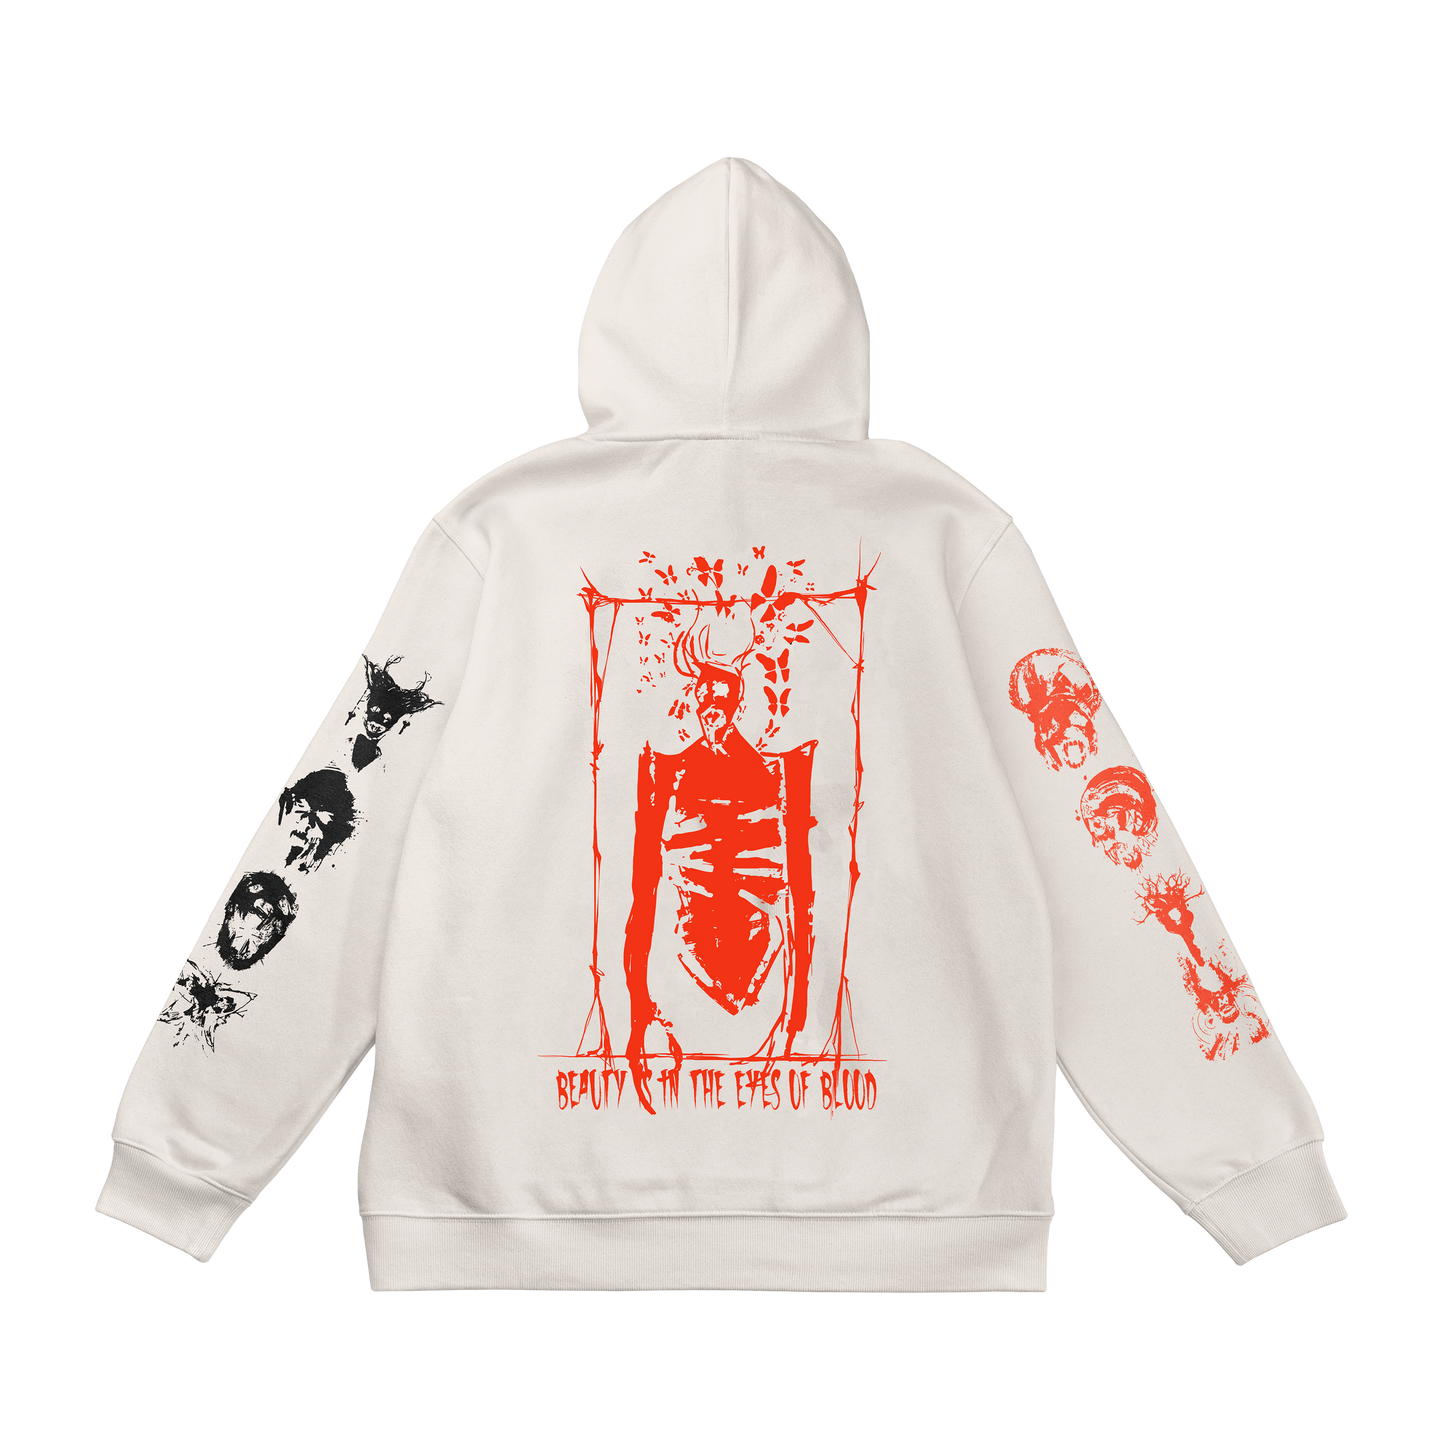 any means necessary shawn coss red fall game xbox microsoft bethesda studios blooderfly pullover hoodie sandshell natural back